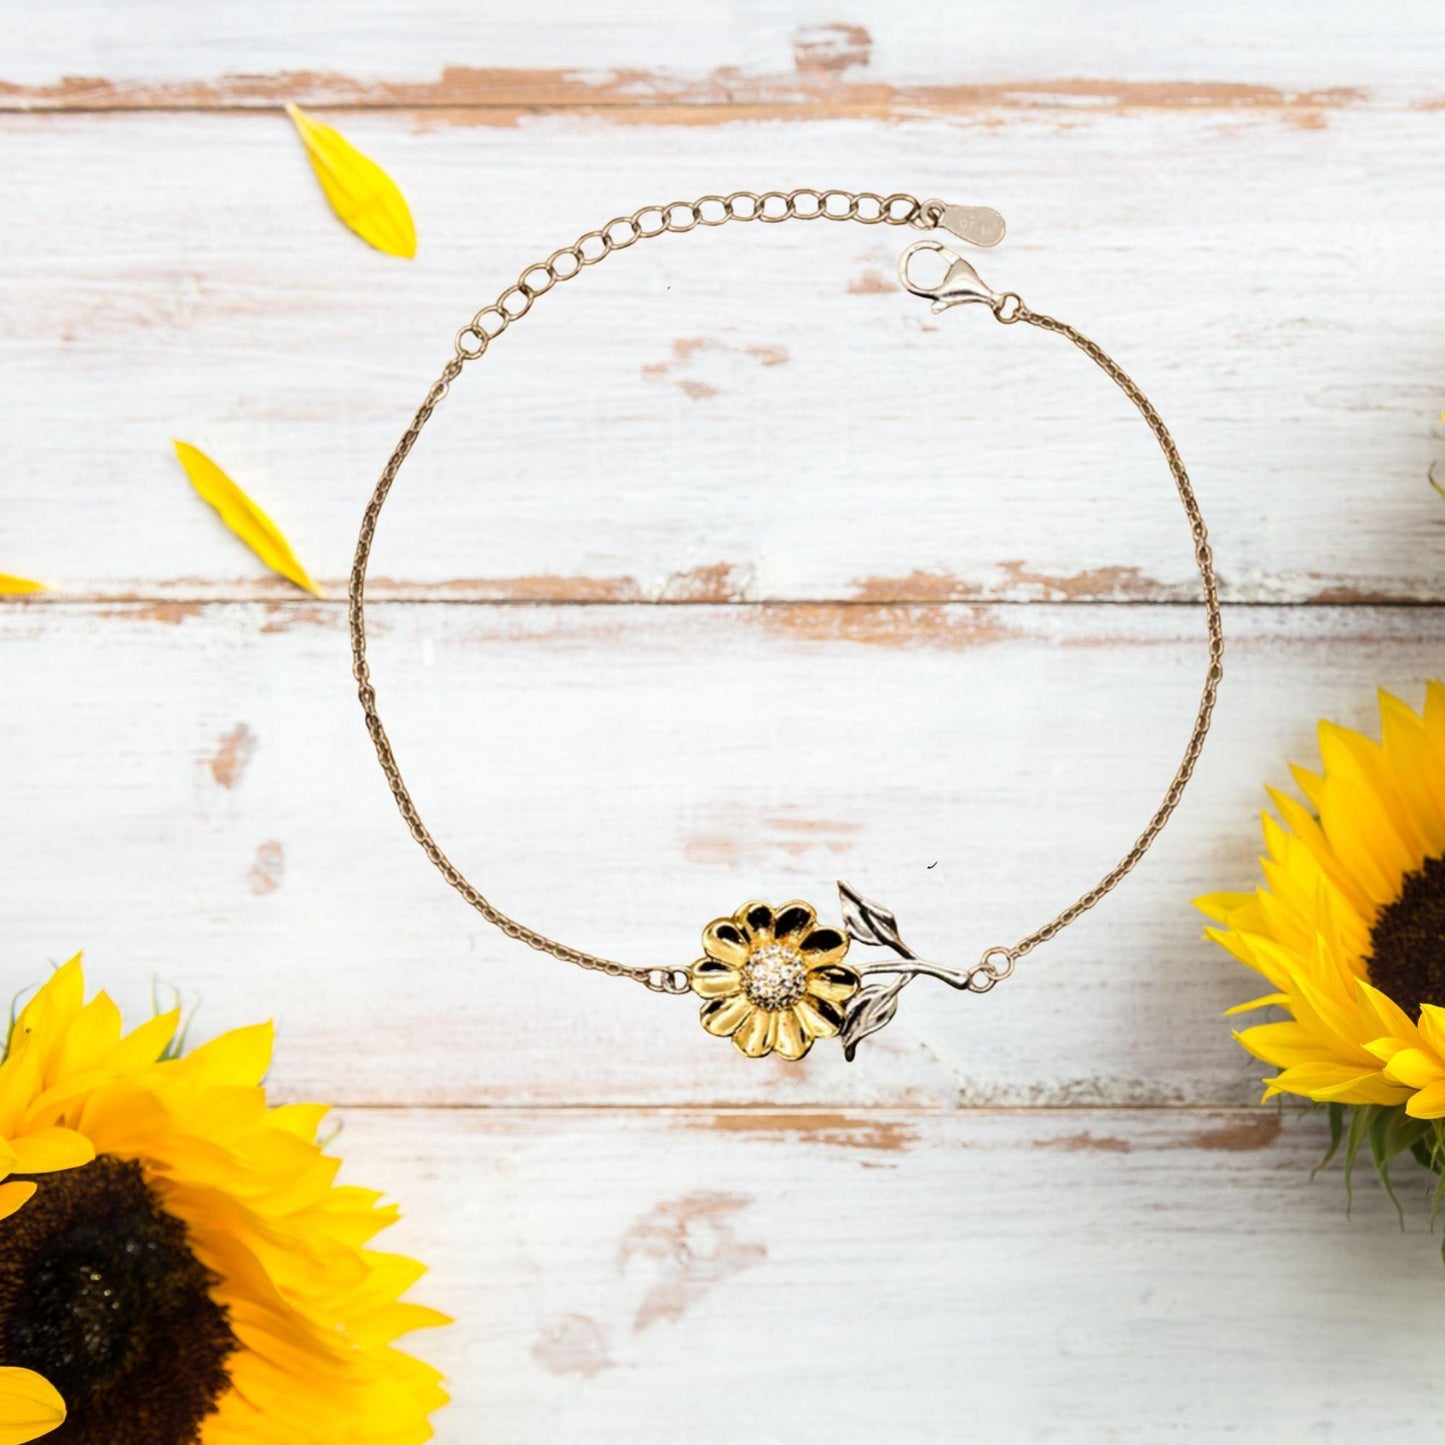 Remarkable Biologist Gifts, Your dedication and hard work, Inspirational Birthday Christmas Unique Sunflower Bracelet For Biologist, Coworkers, Men, Women, Friends - Mallard Moon Gift Shop